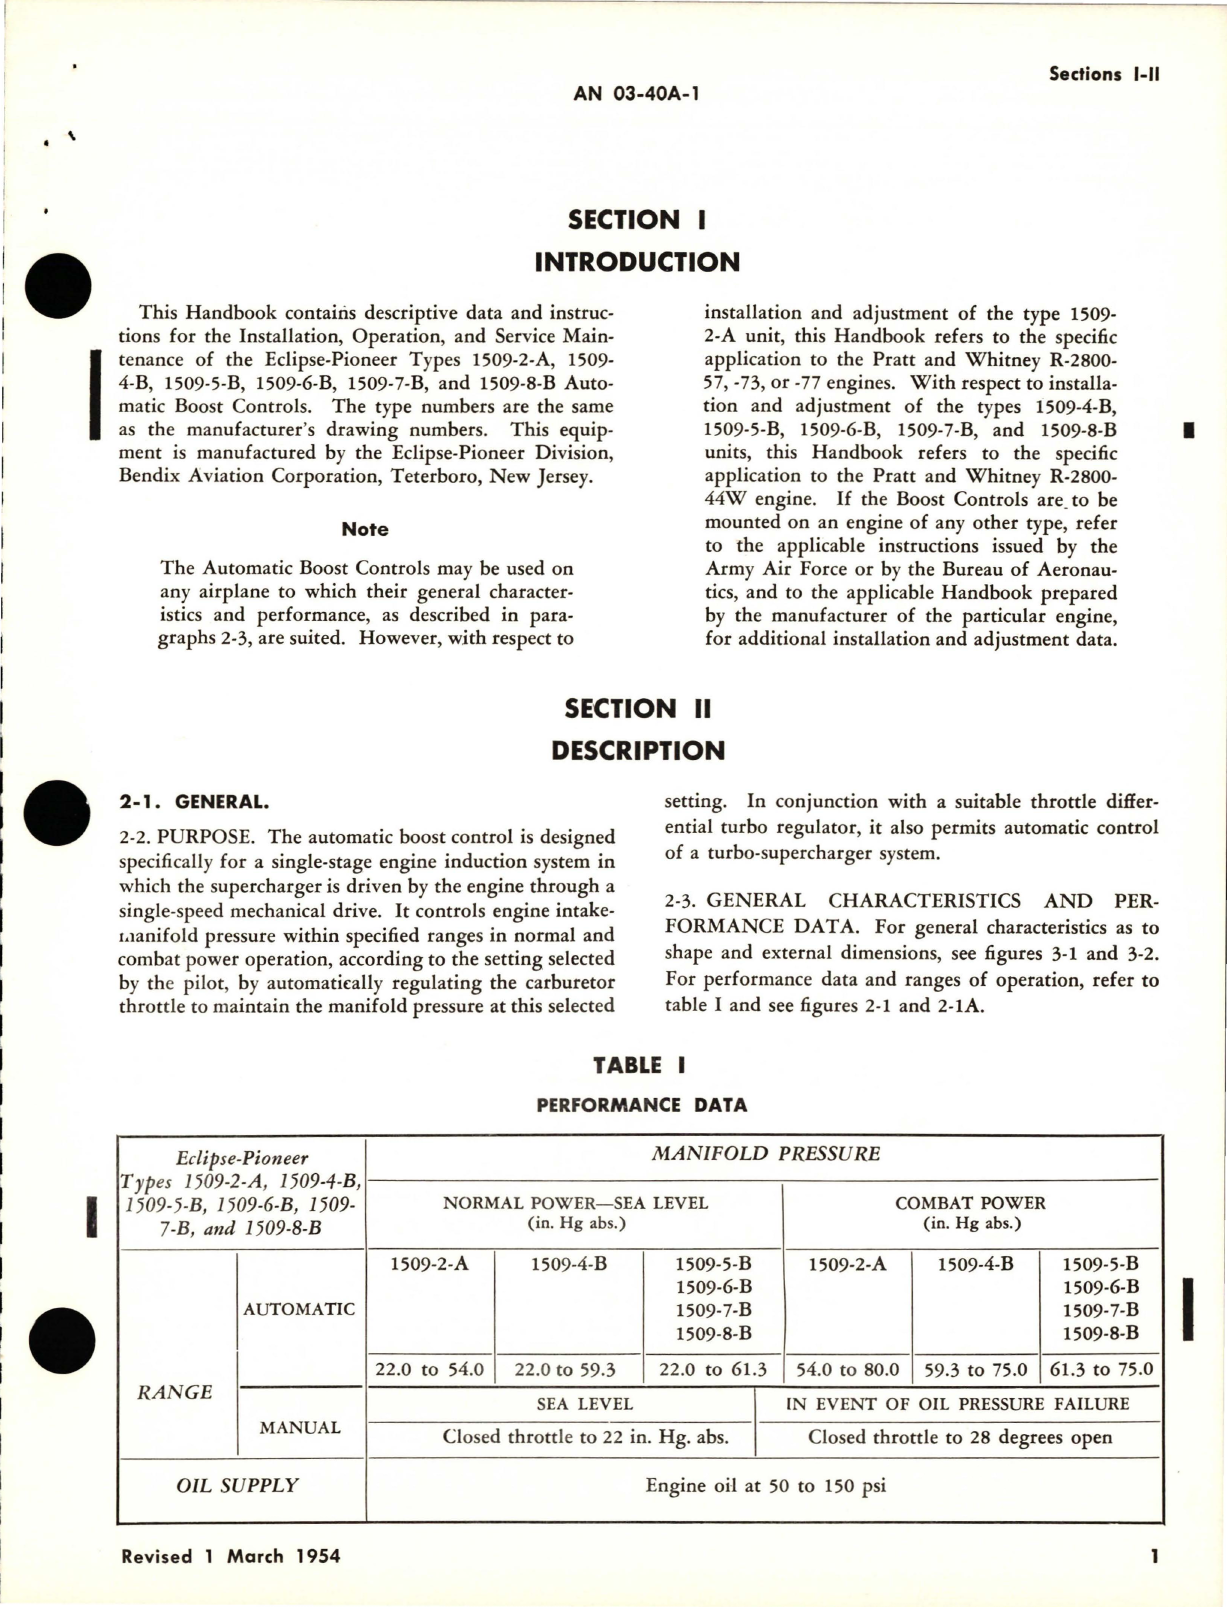 Sample page 5 from AirCorps Library document: Operation and Service Instructions for Automatic Boost Control - Types 1509-2-A, 1509-4-B, 1509-5-B, 1509-6-B, 1509-7-B, 1509-8-B